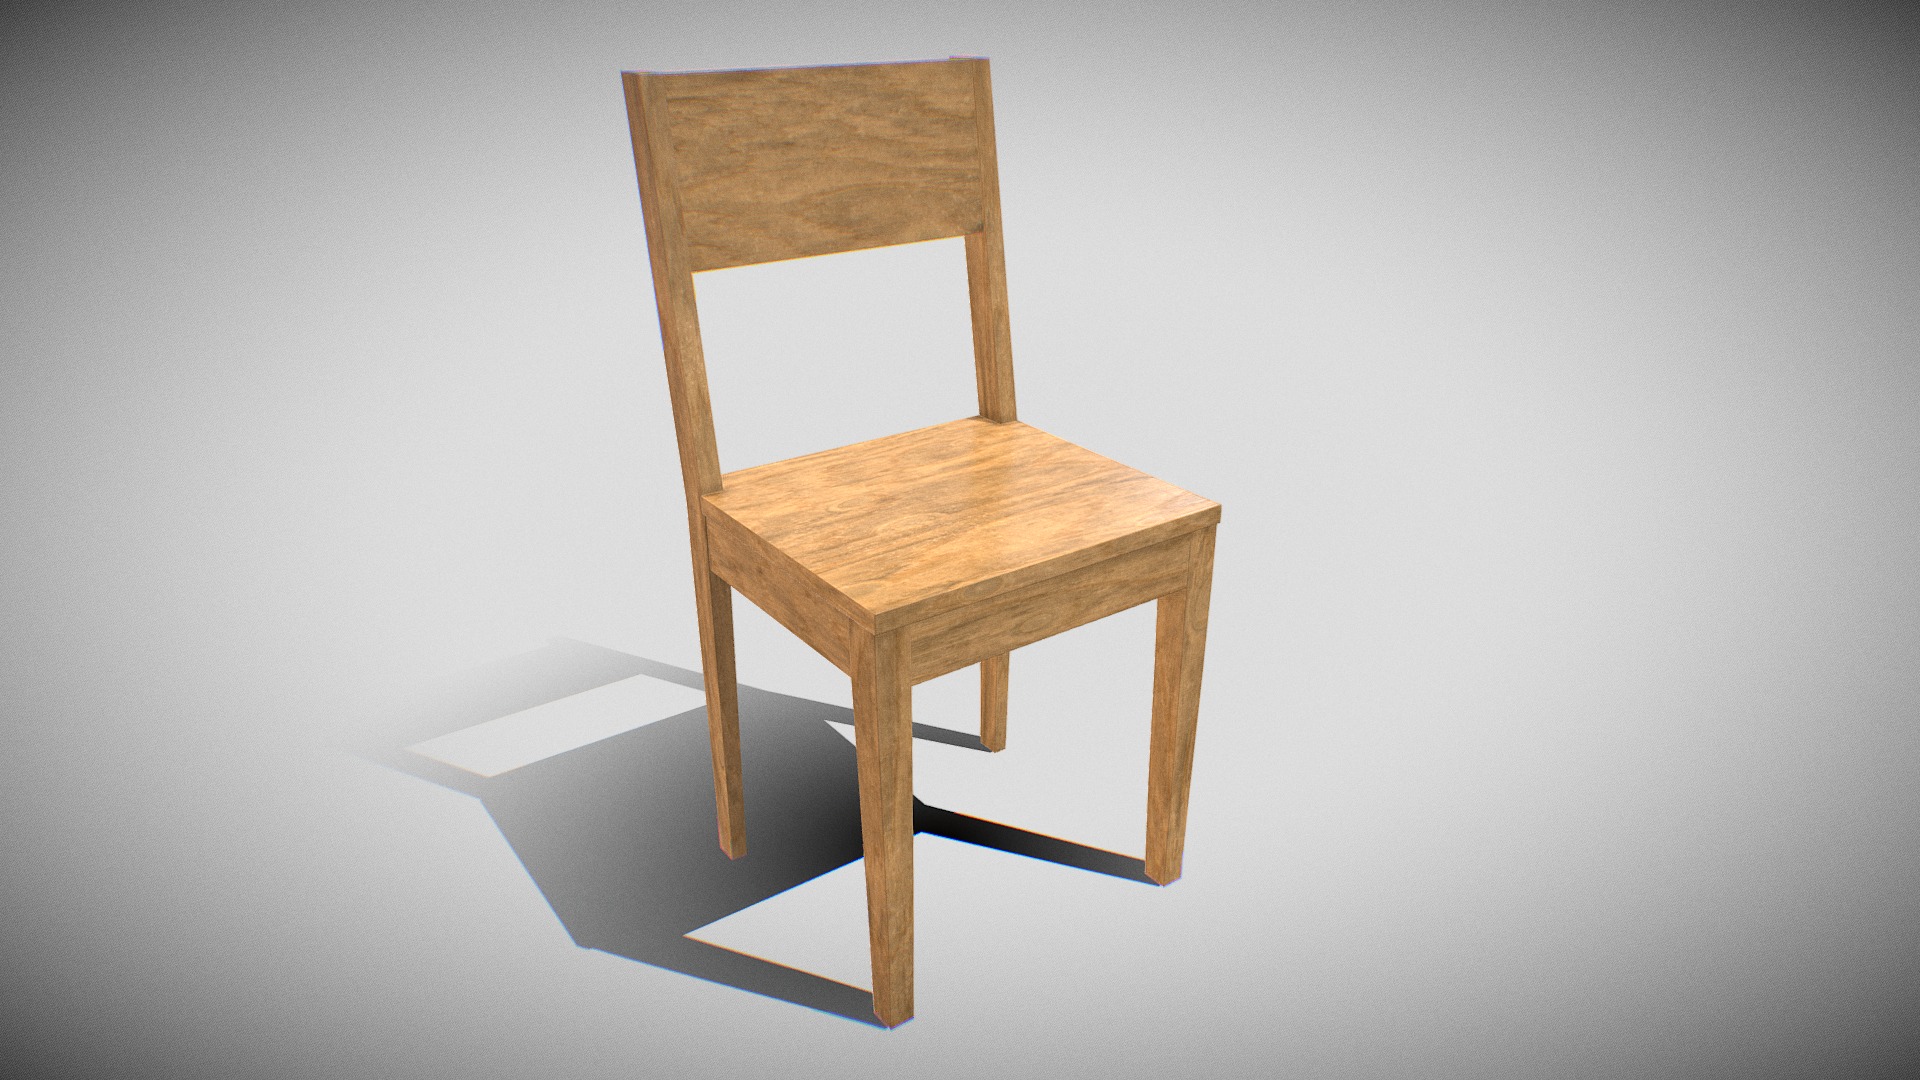 3D model Chair wooden - This is a 3D model of the Chair wooden. The 3D model is about a wooden chair on a white background.